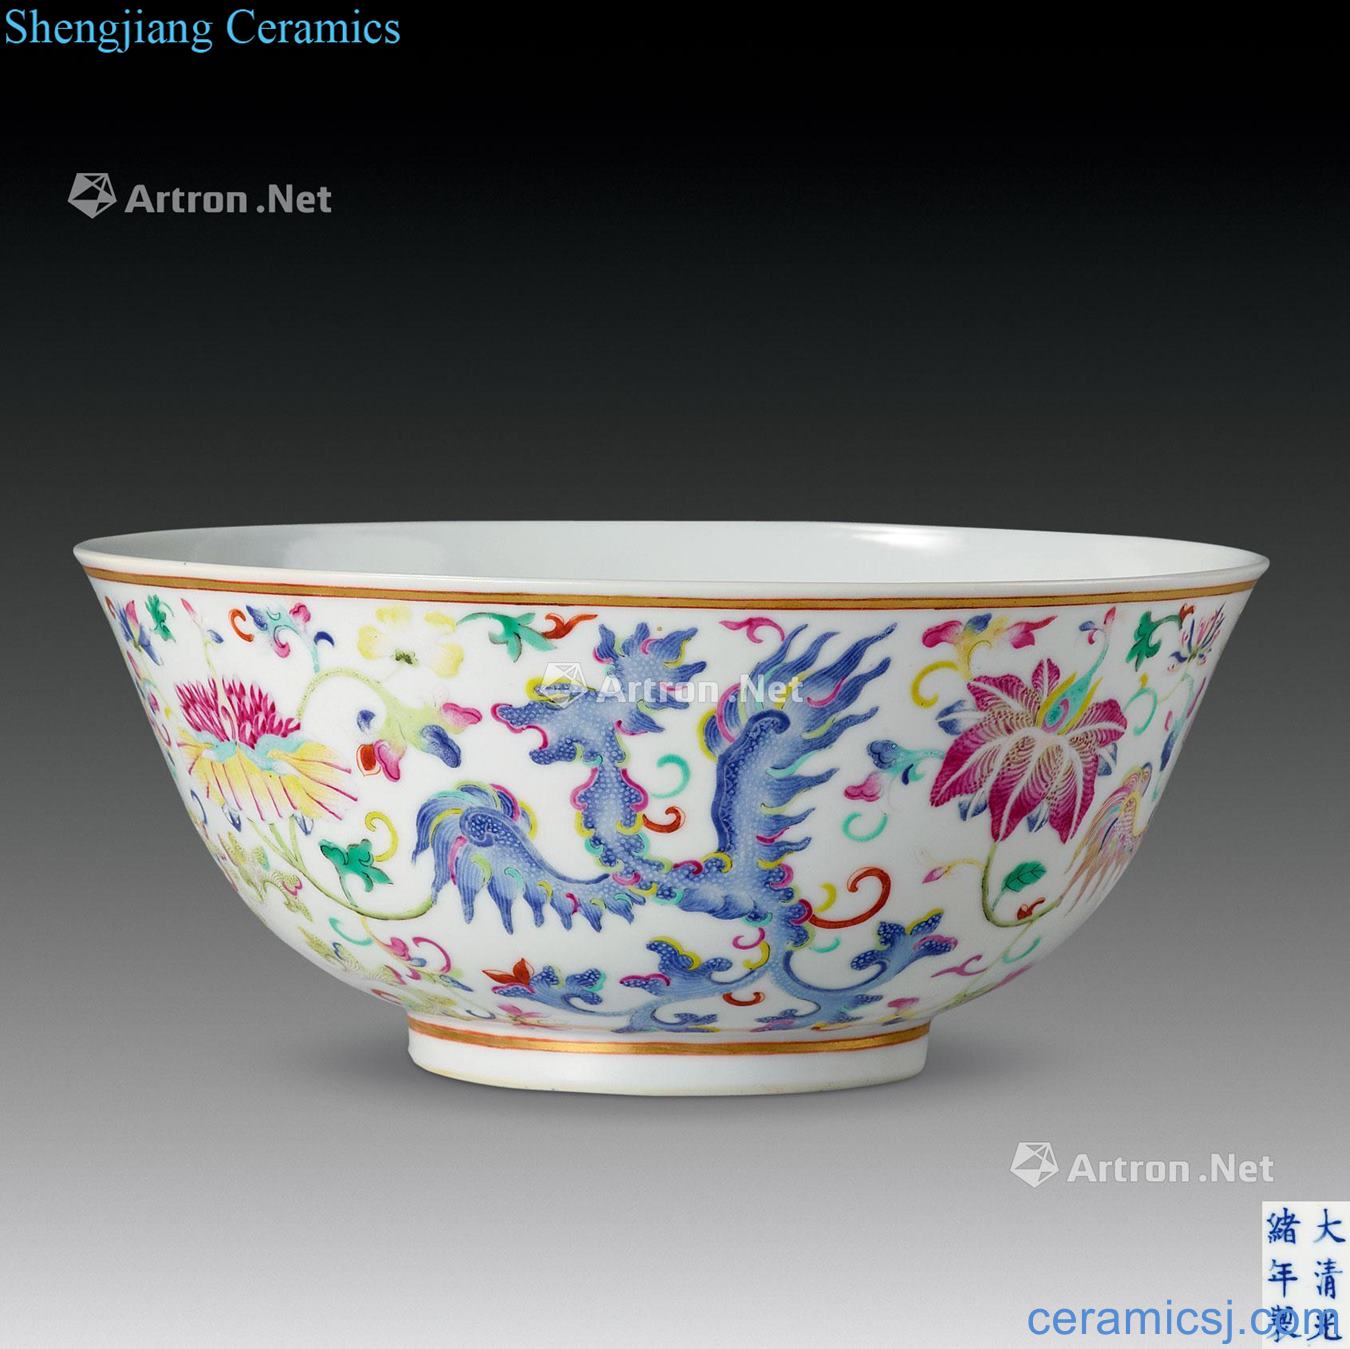 Pastel reign of qing emperor guangxu real talent grain dishes